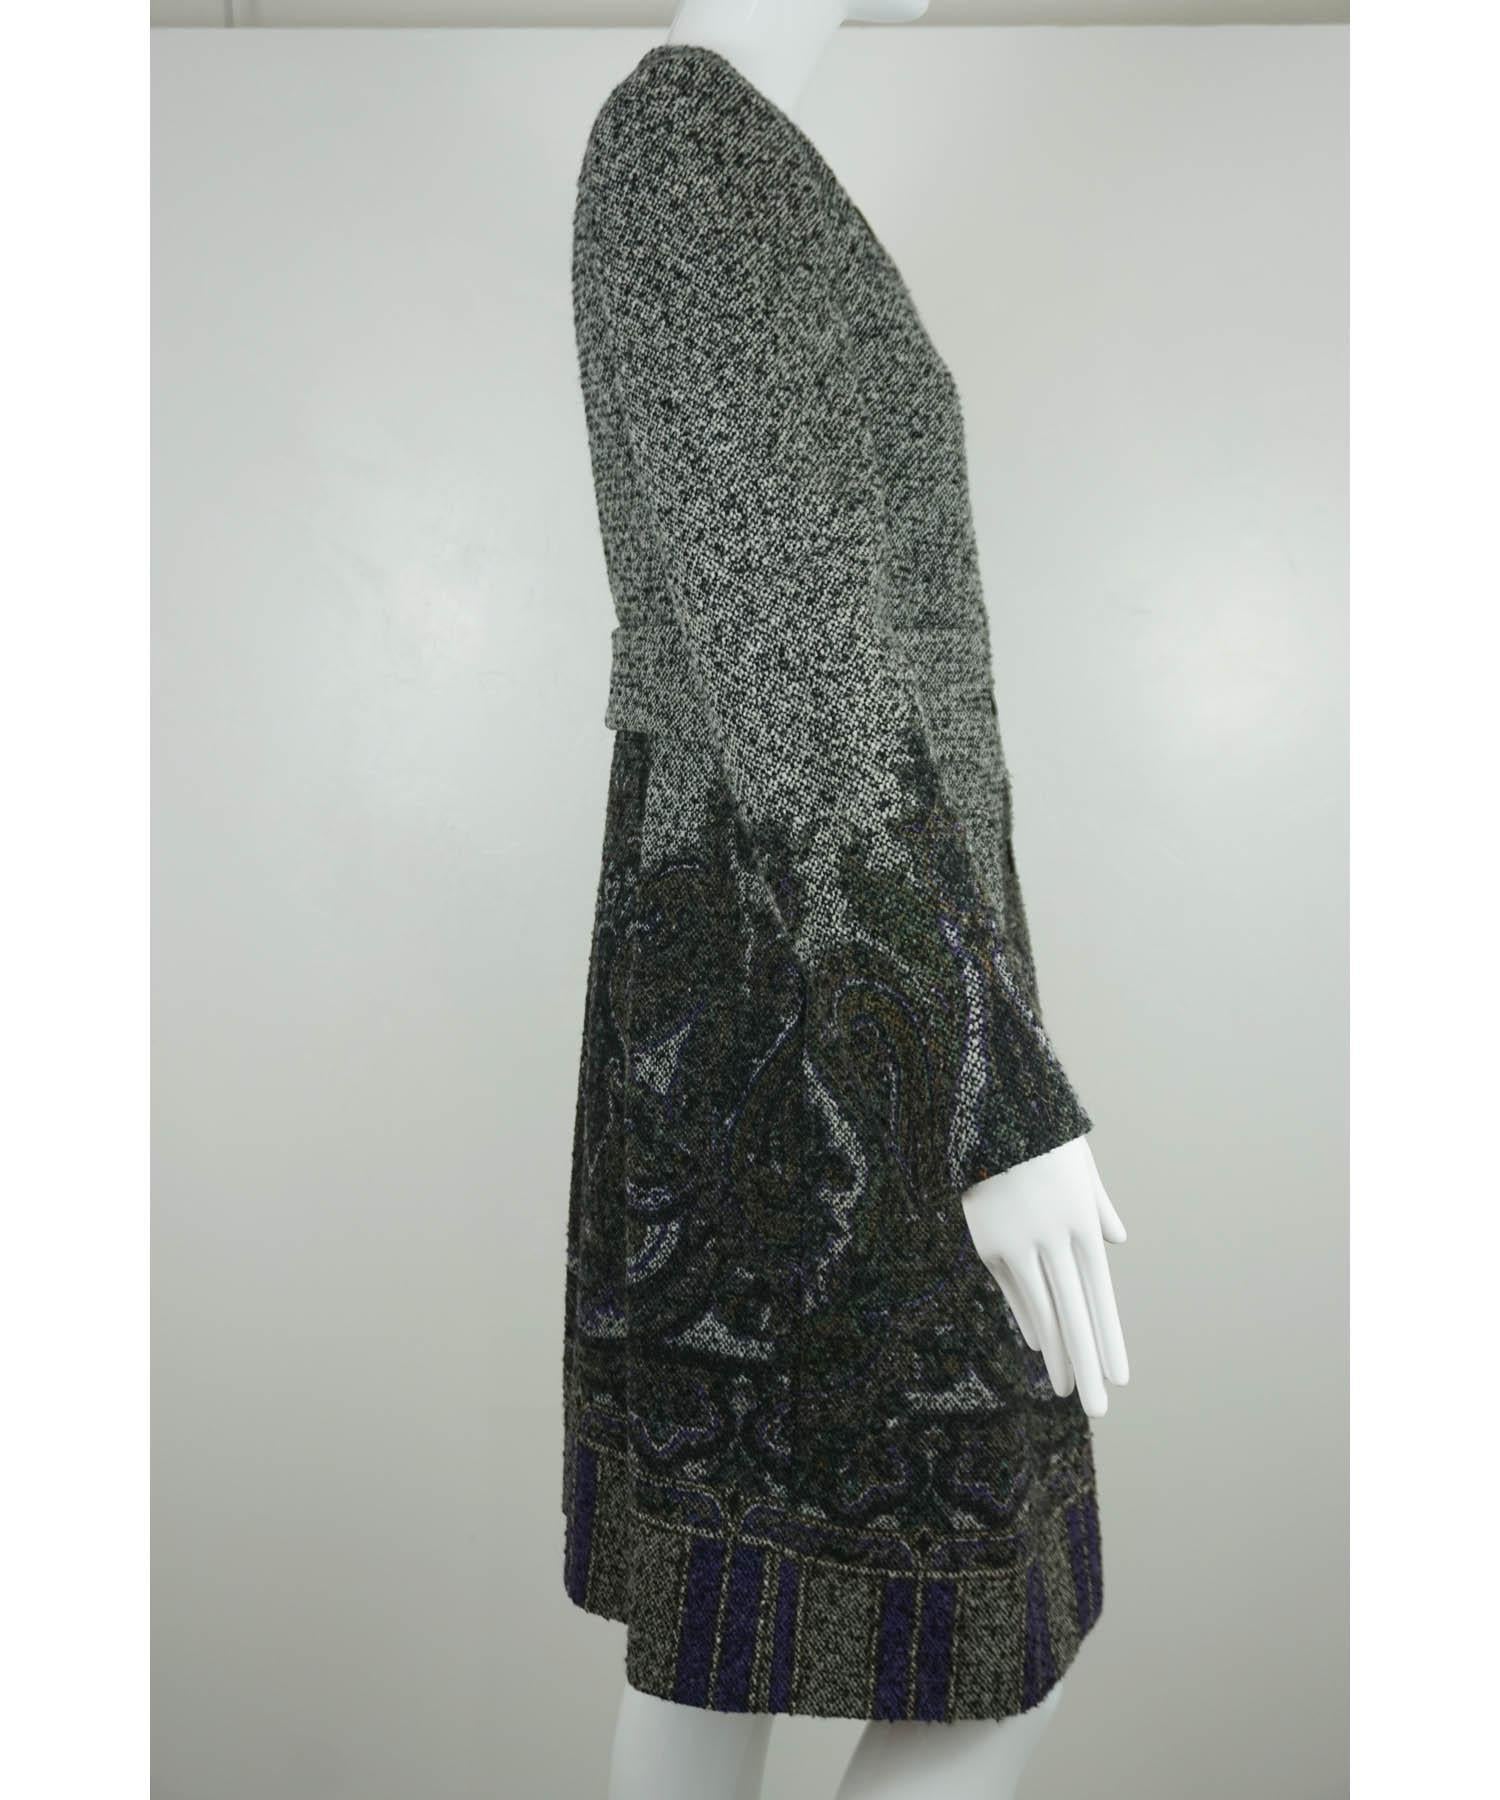 Etro Tweed Paisley Patterned Coat Sz 42 In Excellent Condition For Sale In Carmel, CA